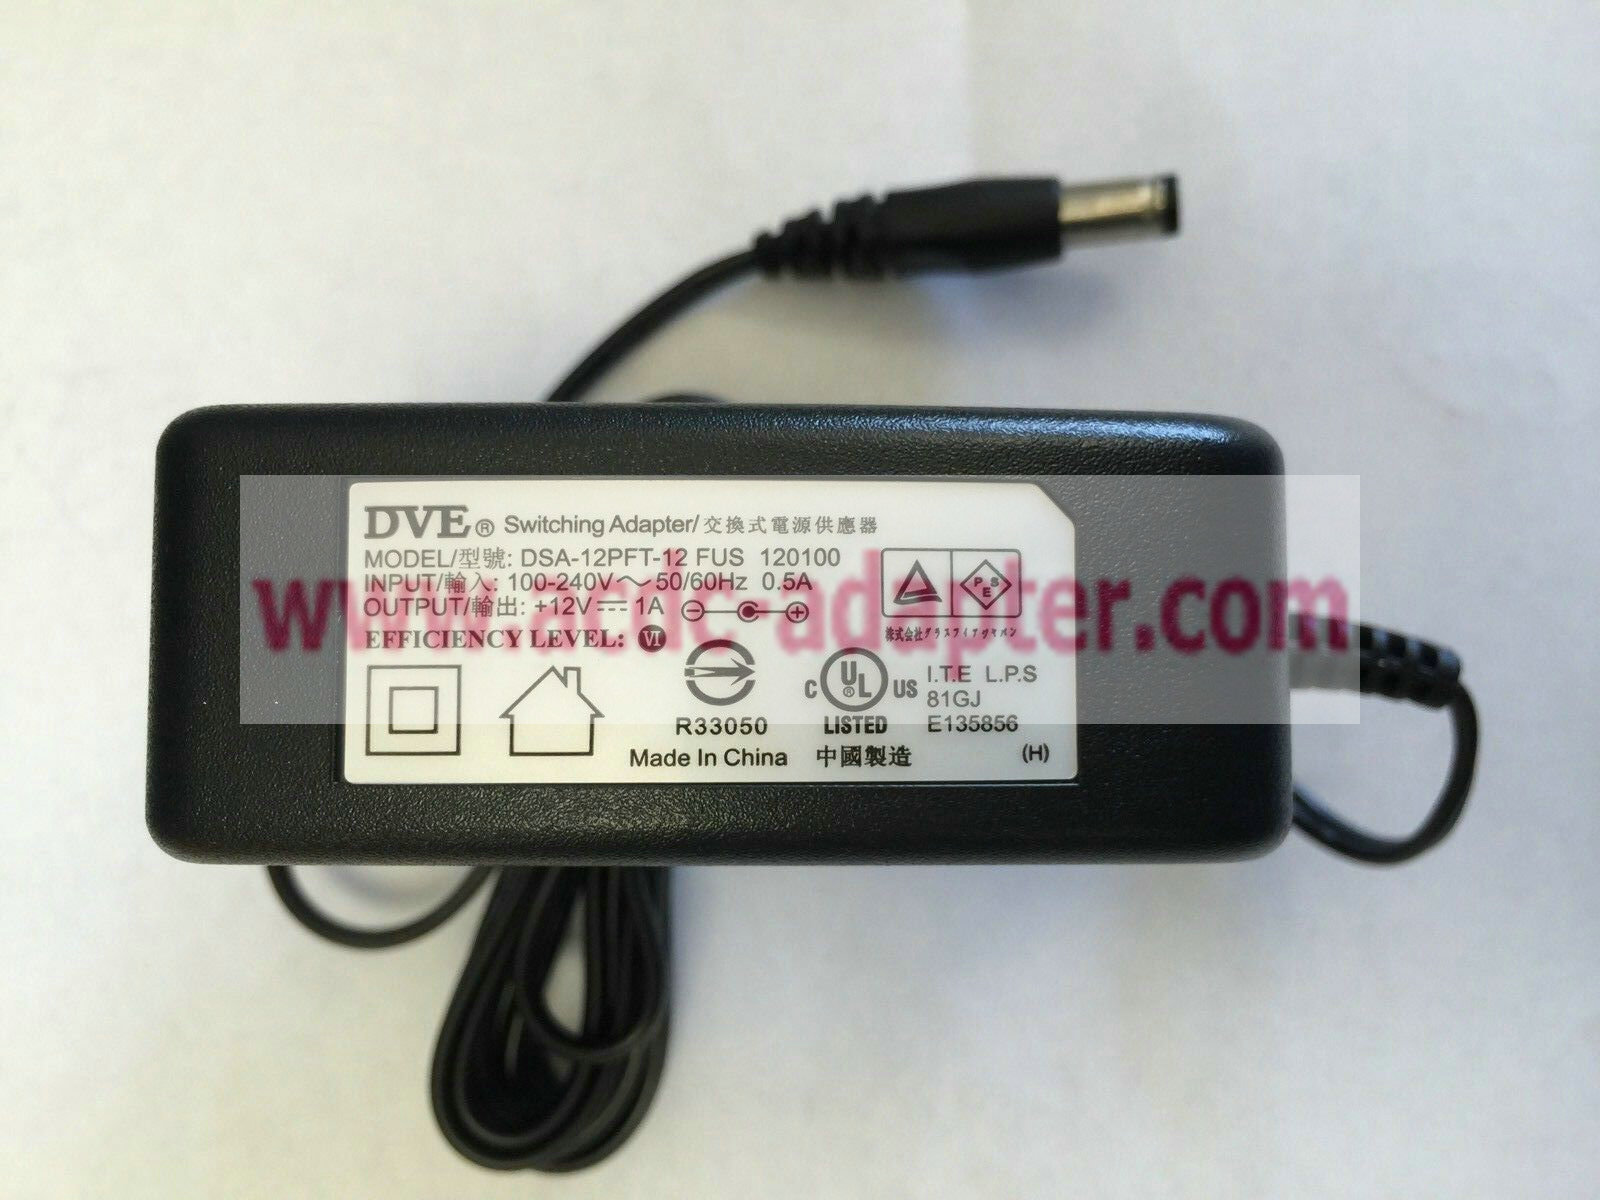 NEW DVE 12 Volt DC 1.0A DSA-12PFT-12 FUS 120100 Switching Adapter PSU power supply